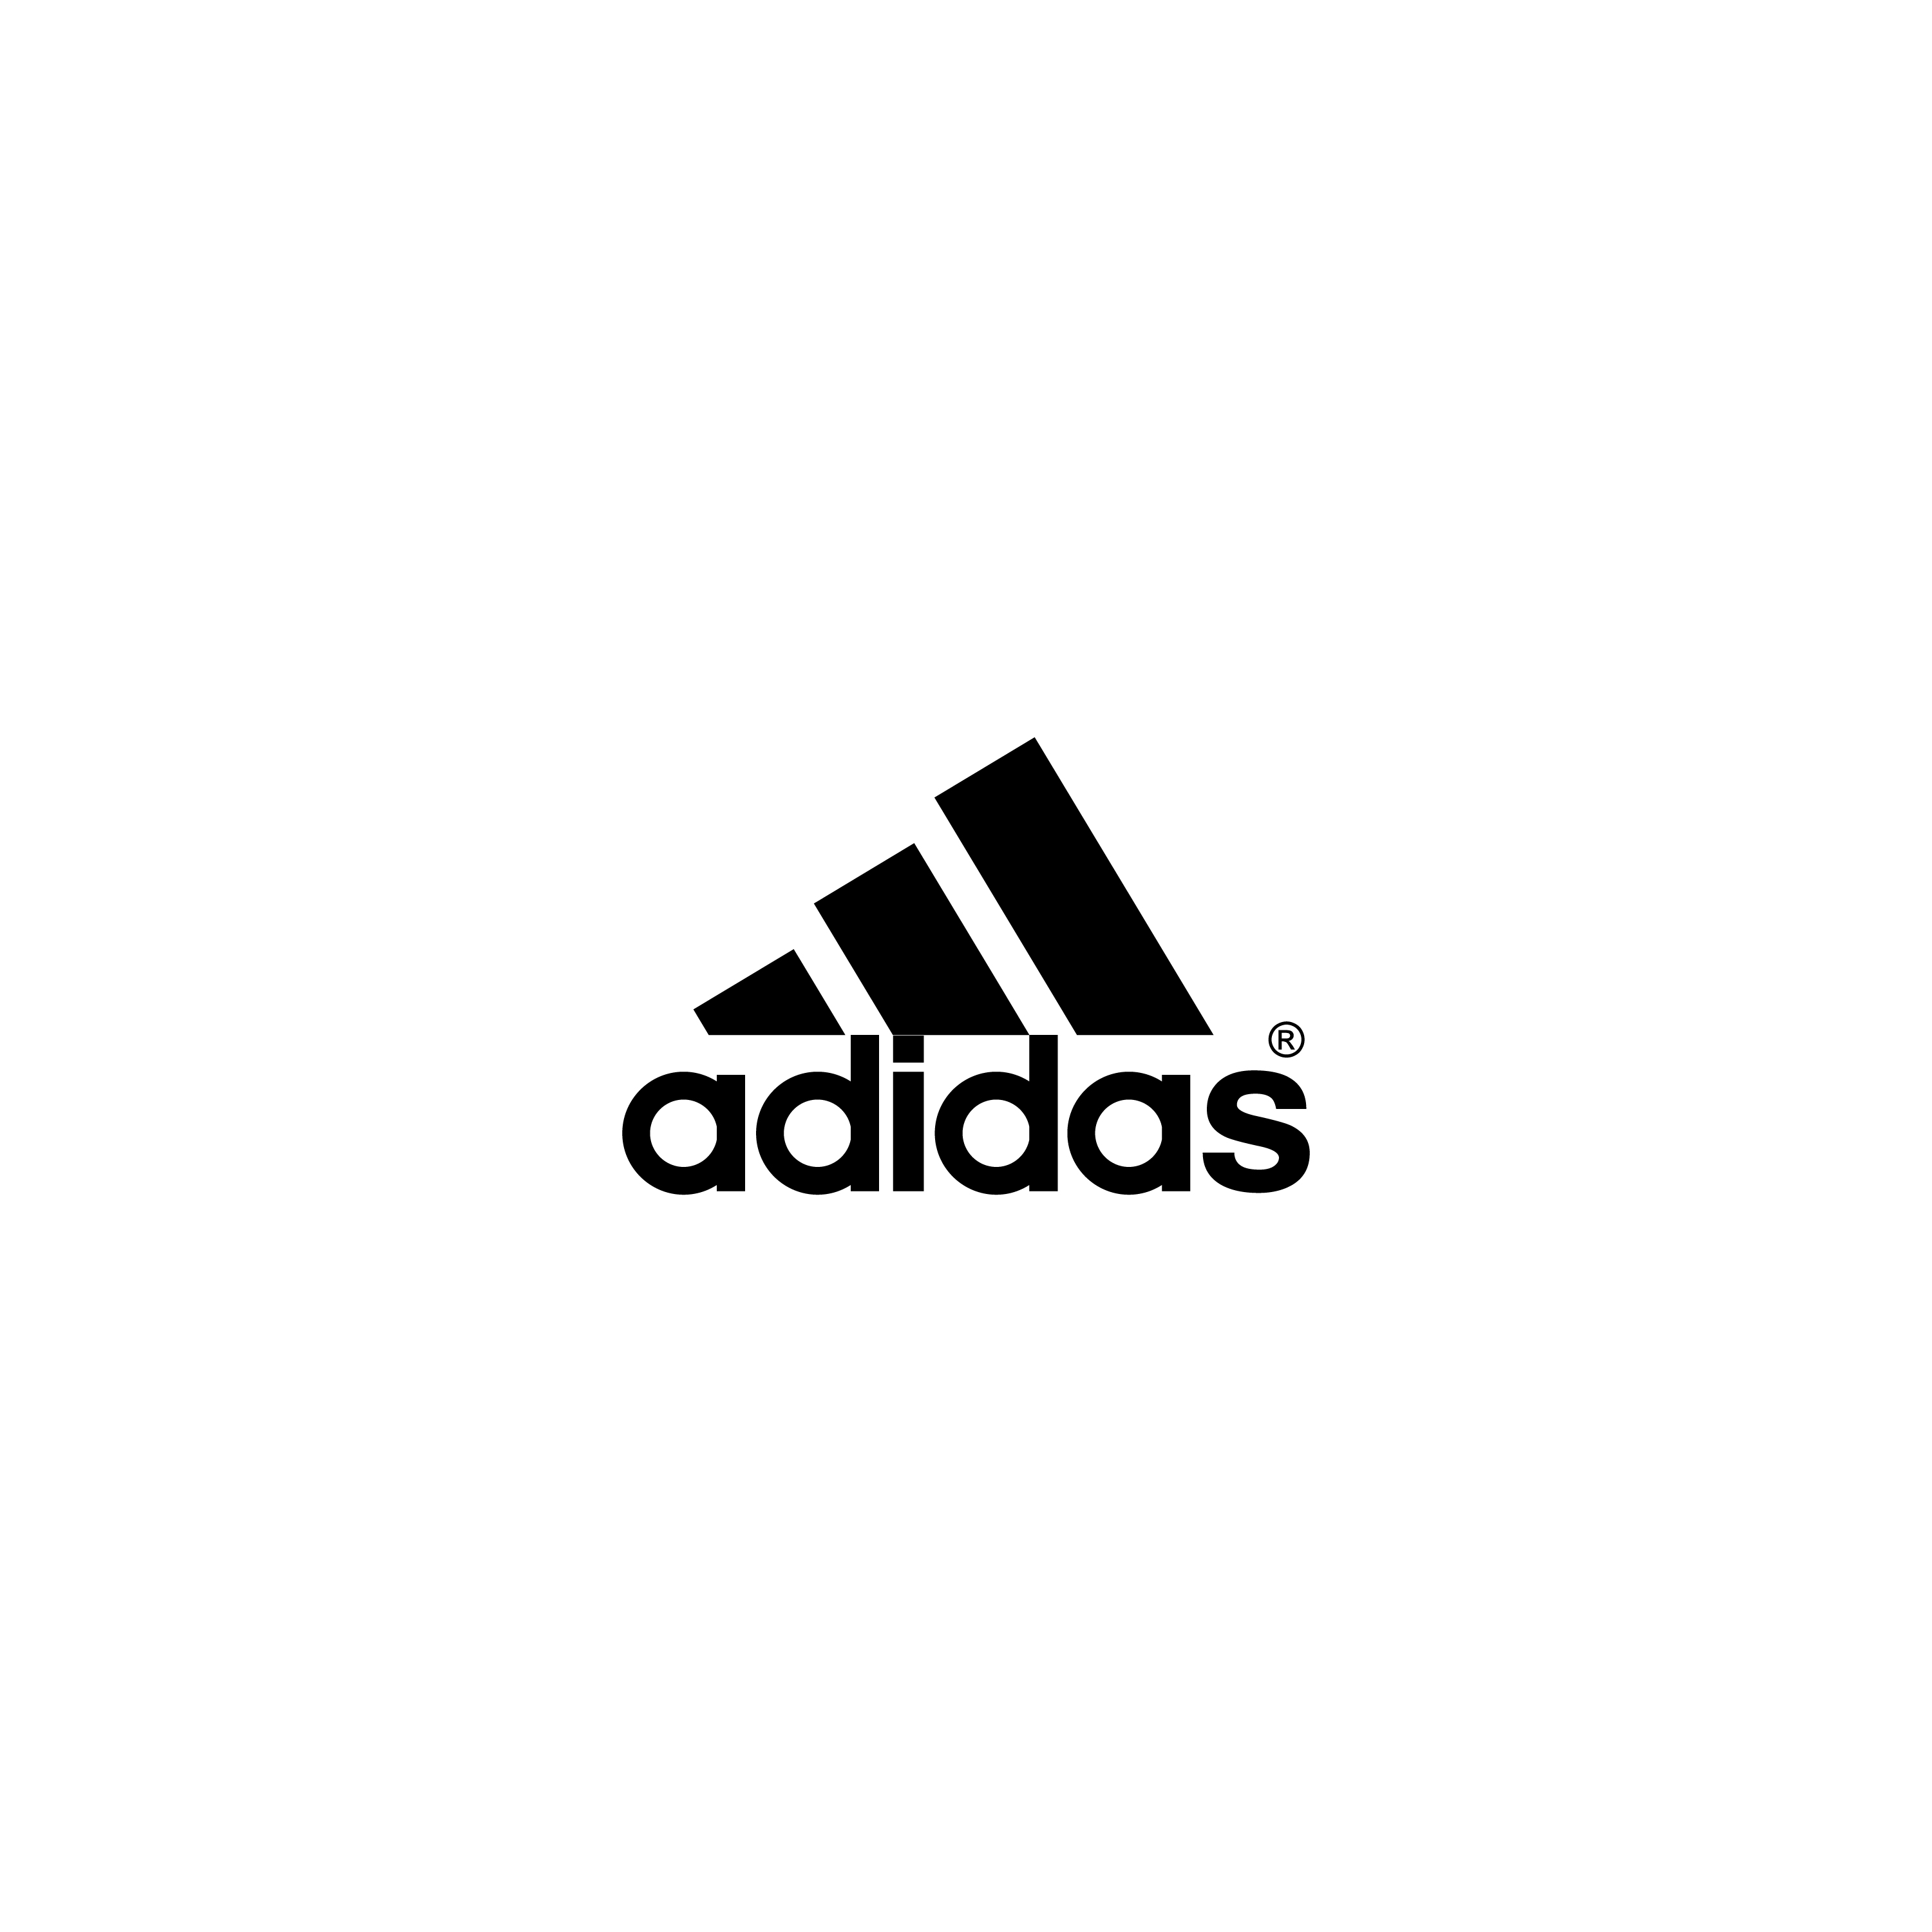 Free Download adidas vector logo Full Vectors Shared by Pixahunt 